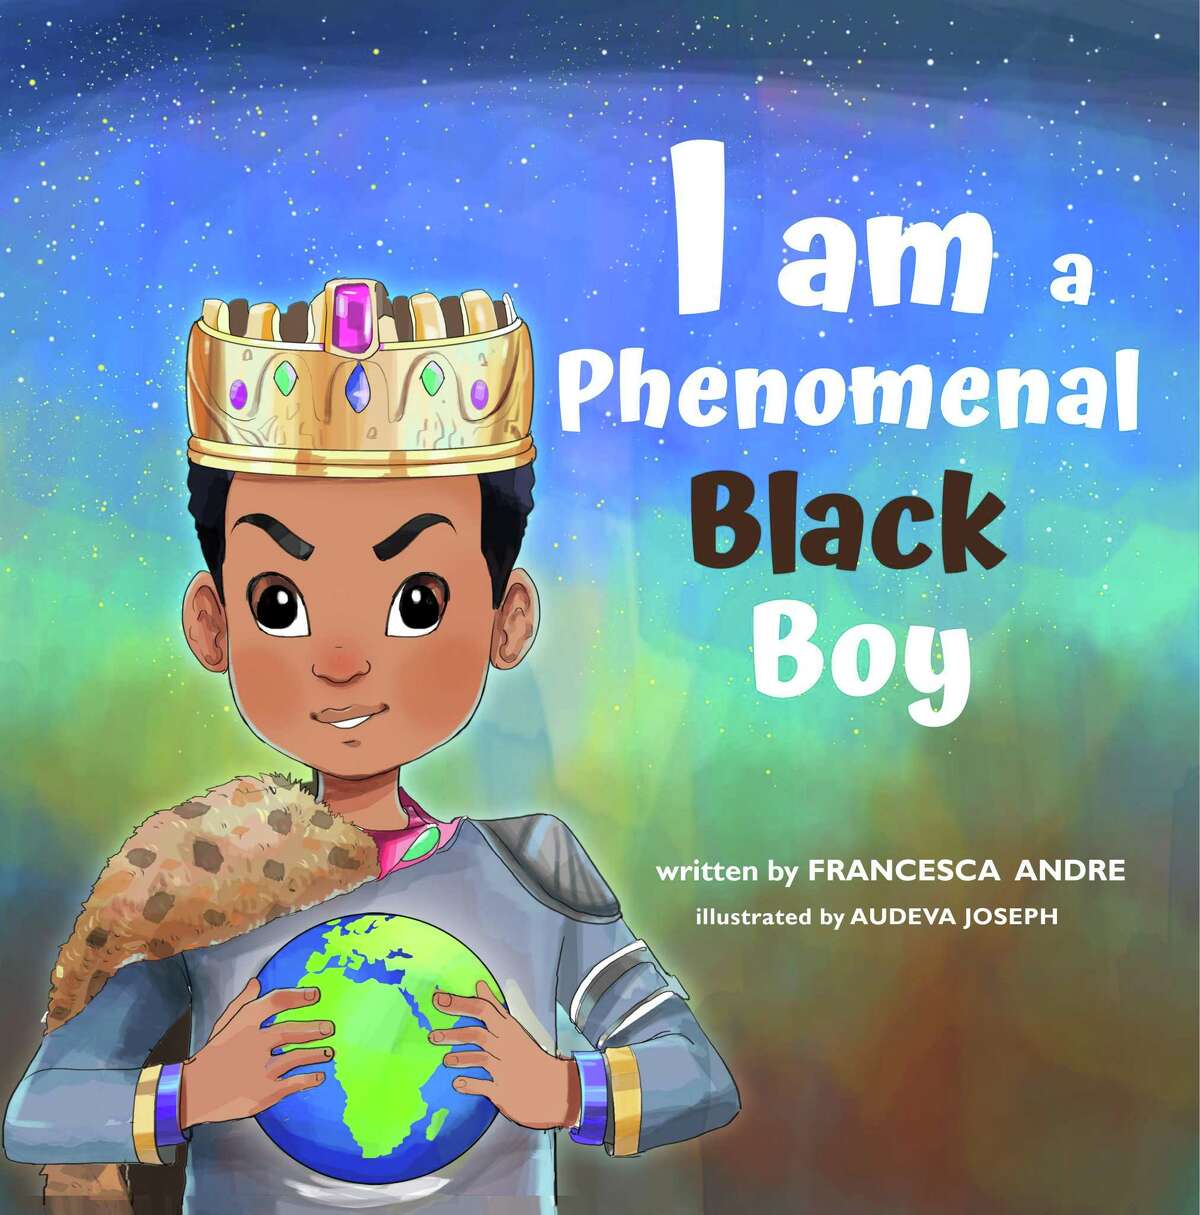 Former Connecticut resident Francesca Andre has written the book “I am a Phenomenal Black Boy.”